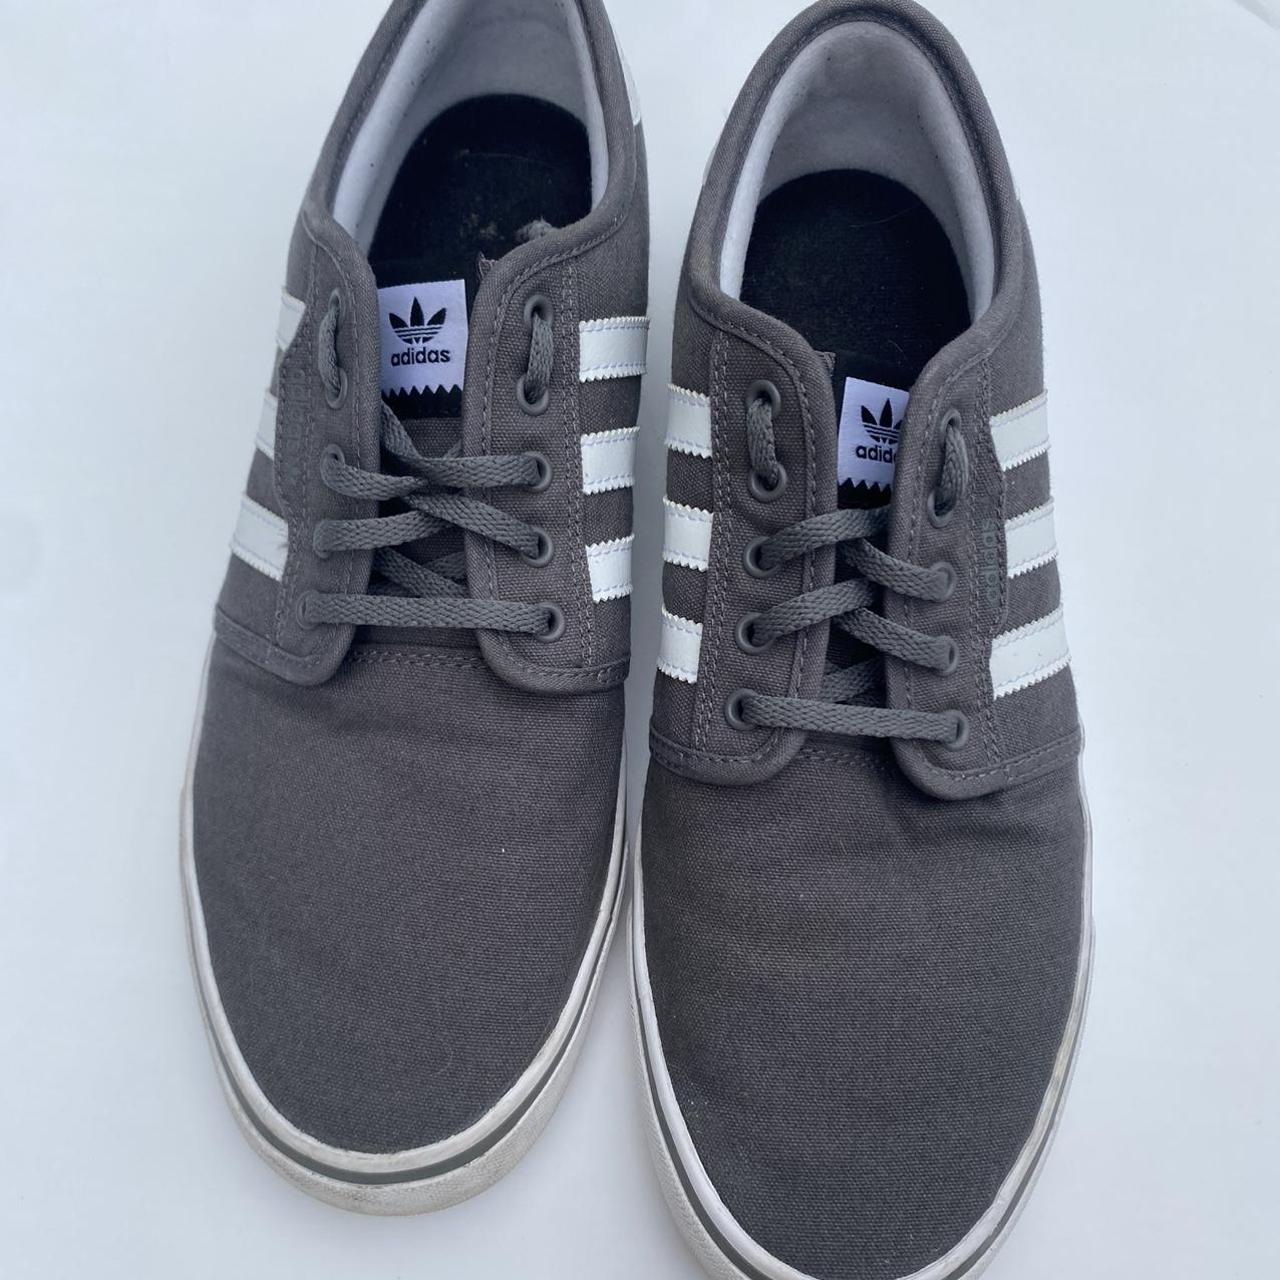 Gray Adidas Skate Shoes Pre-Owned Size... - Depop